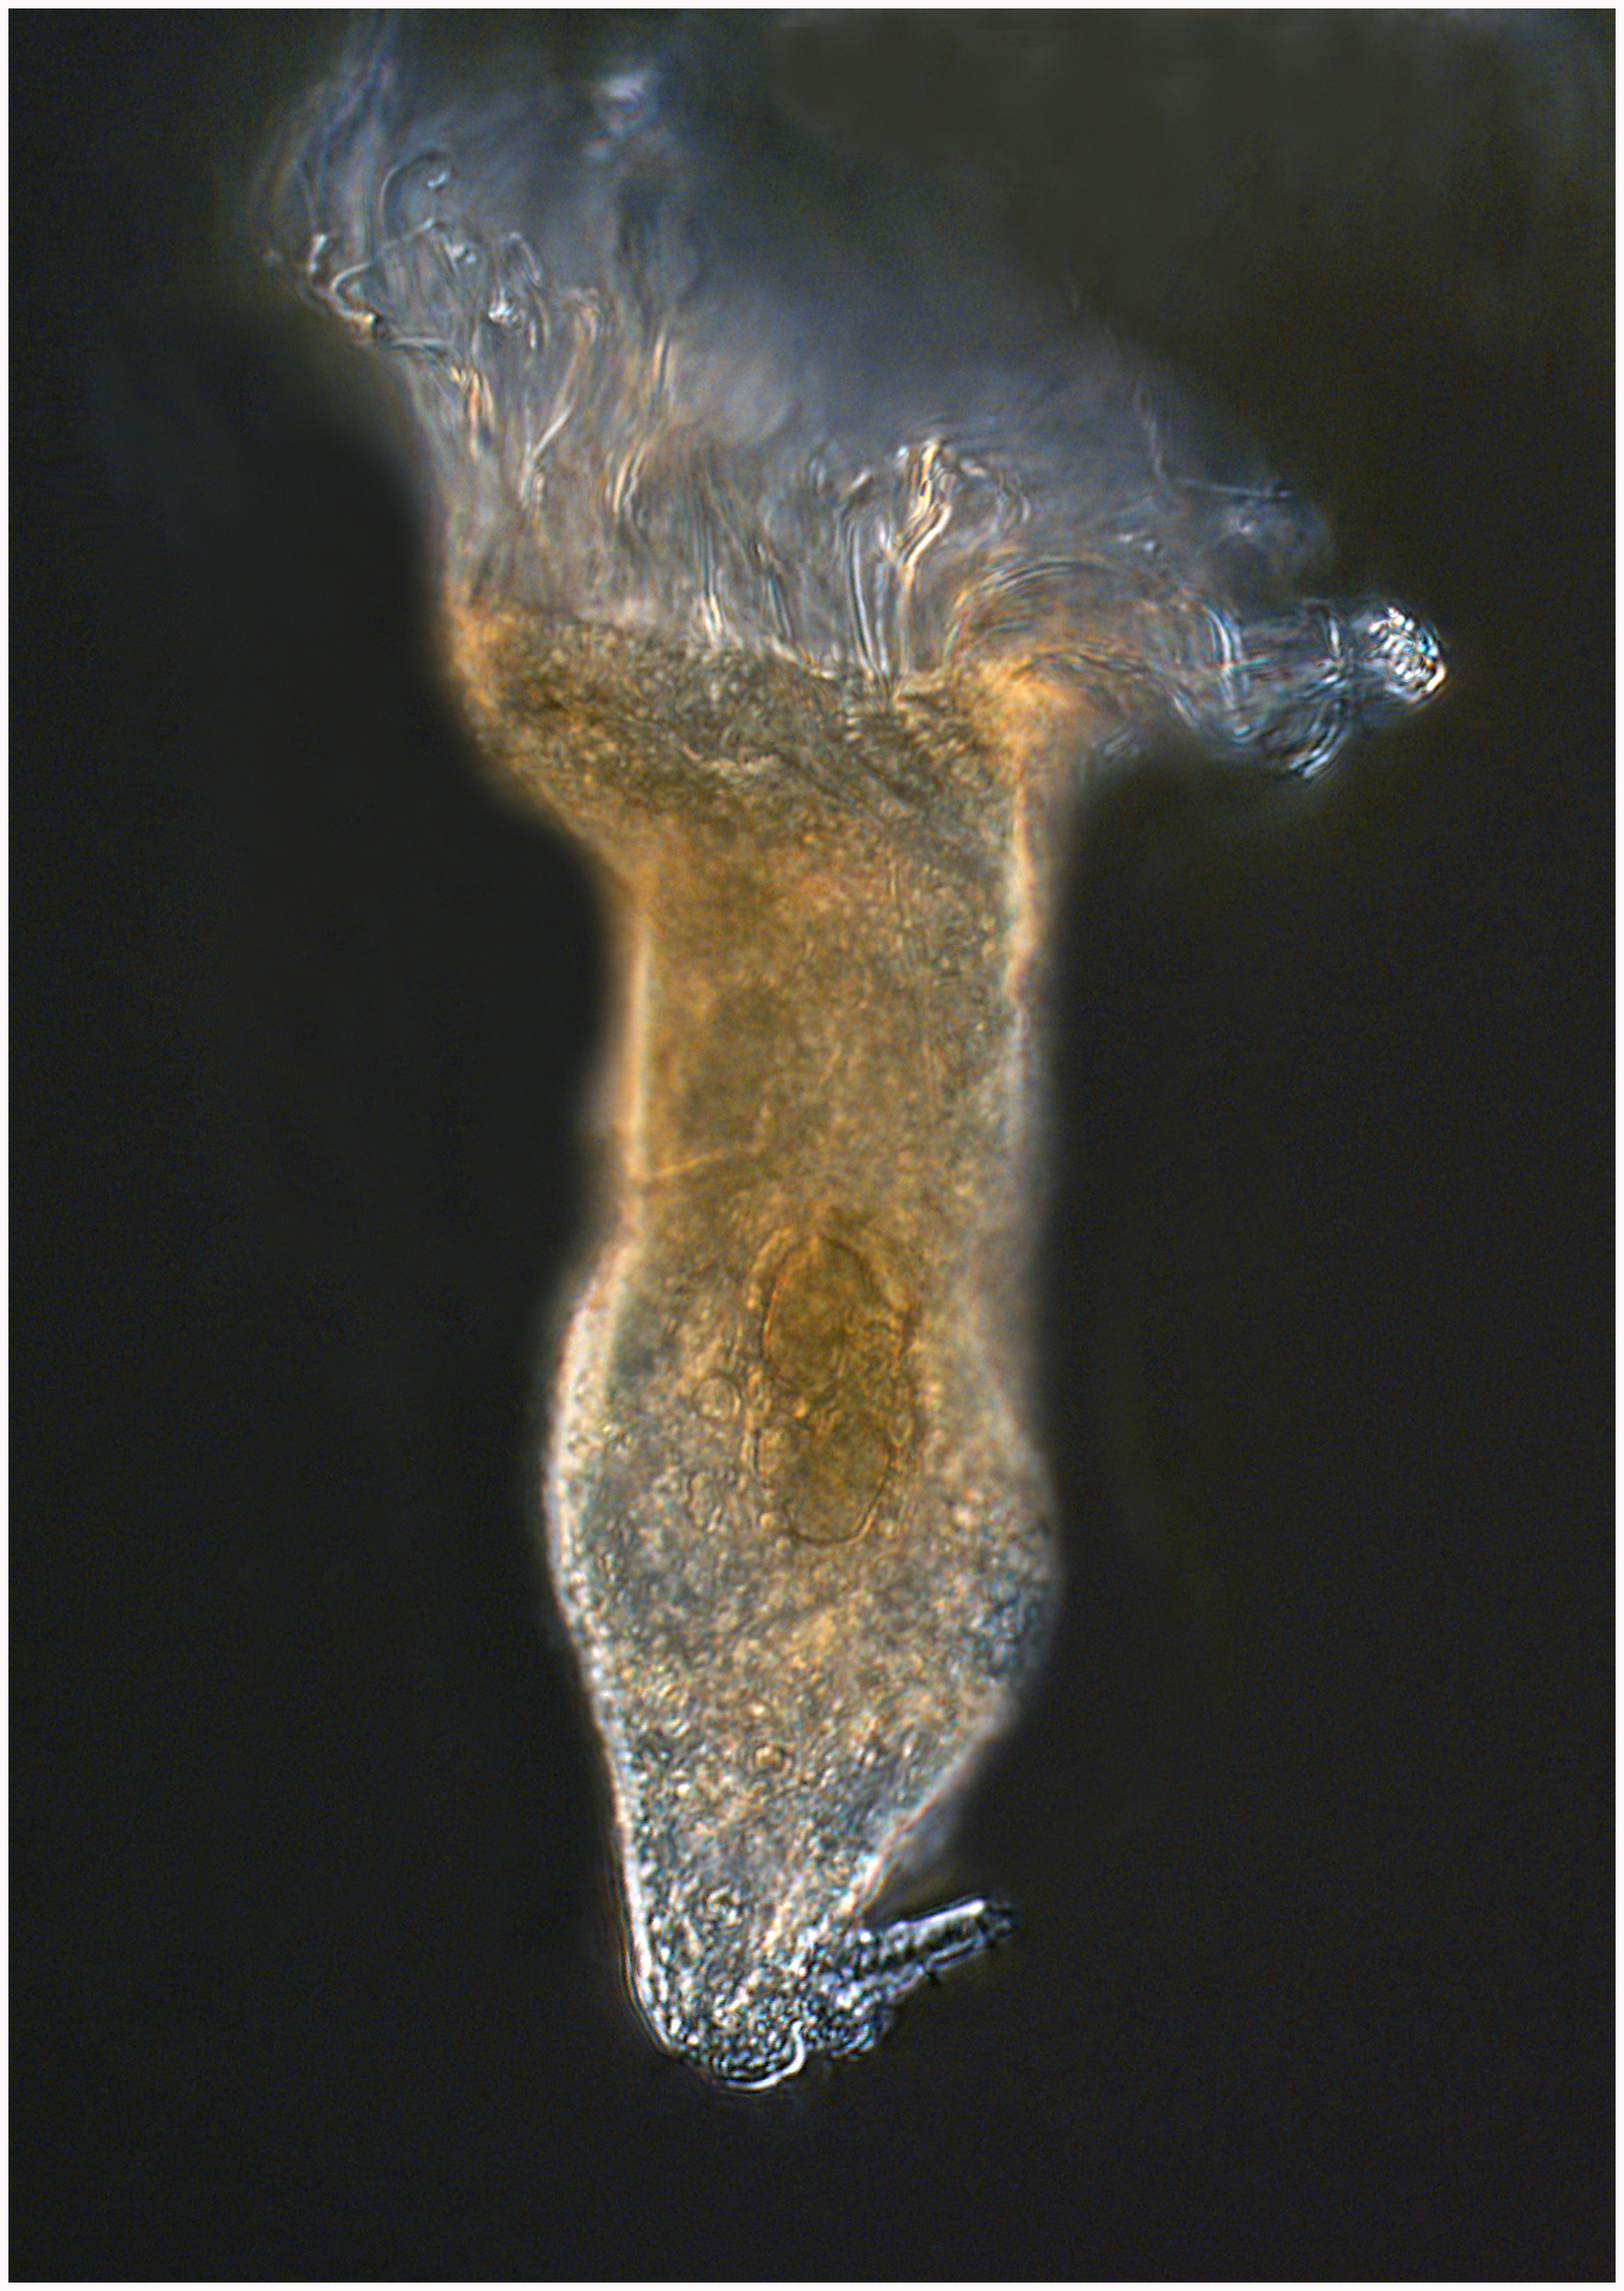 Oligotrich ciliate from the Southern Ocean